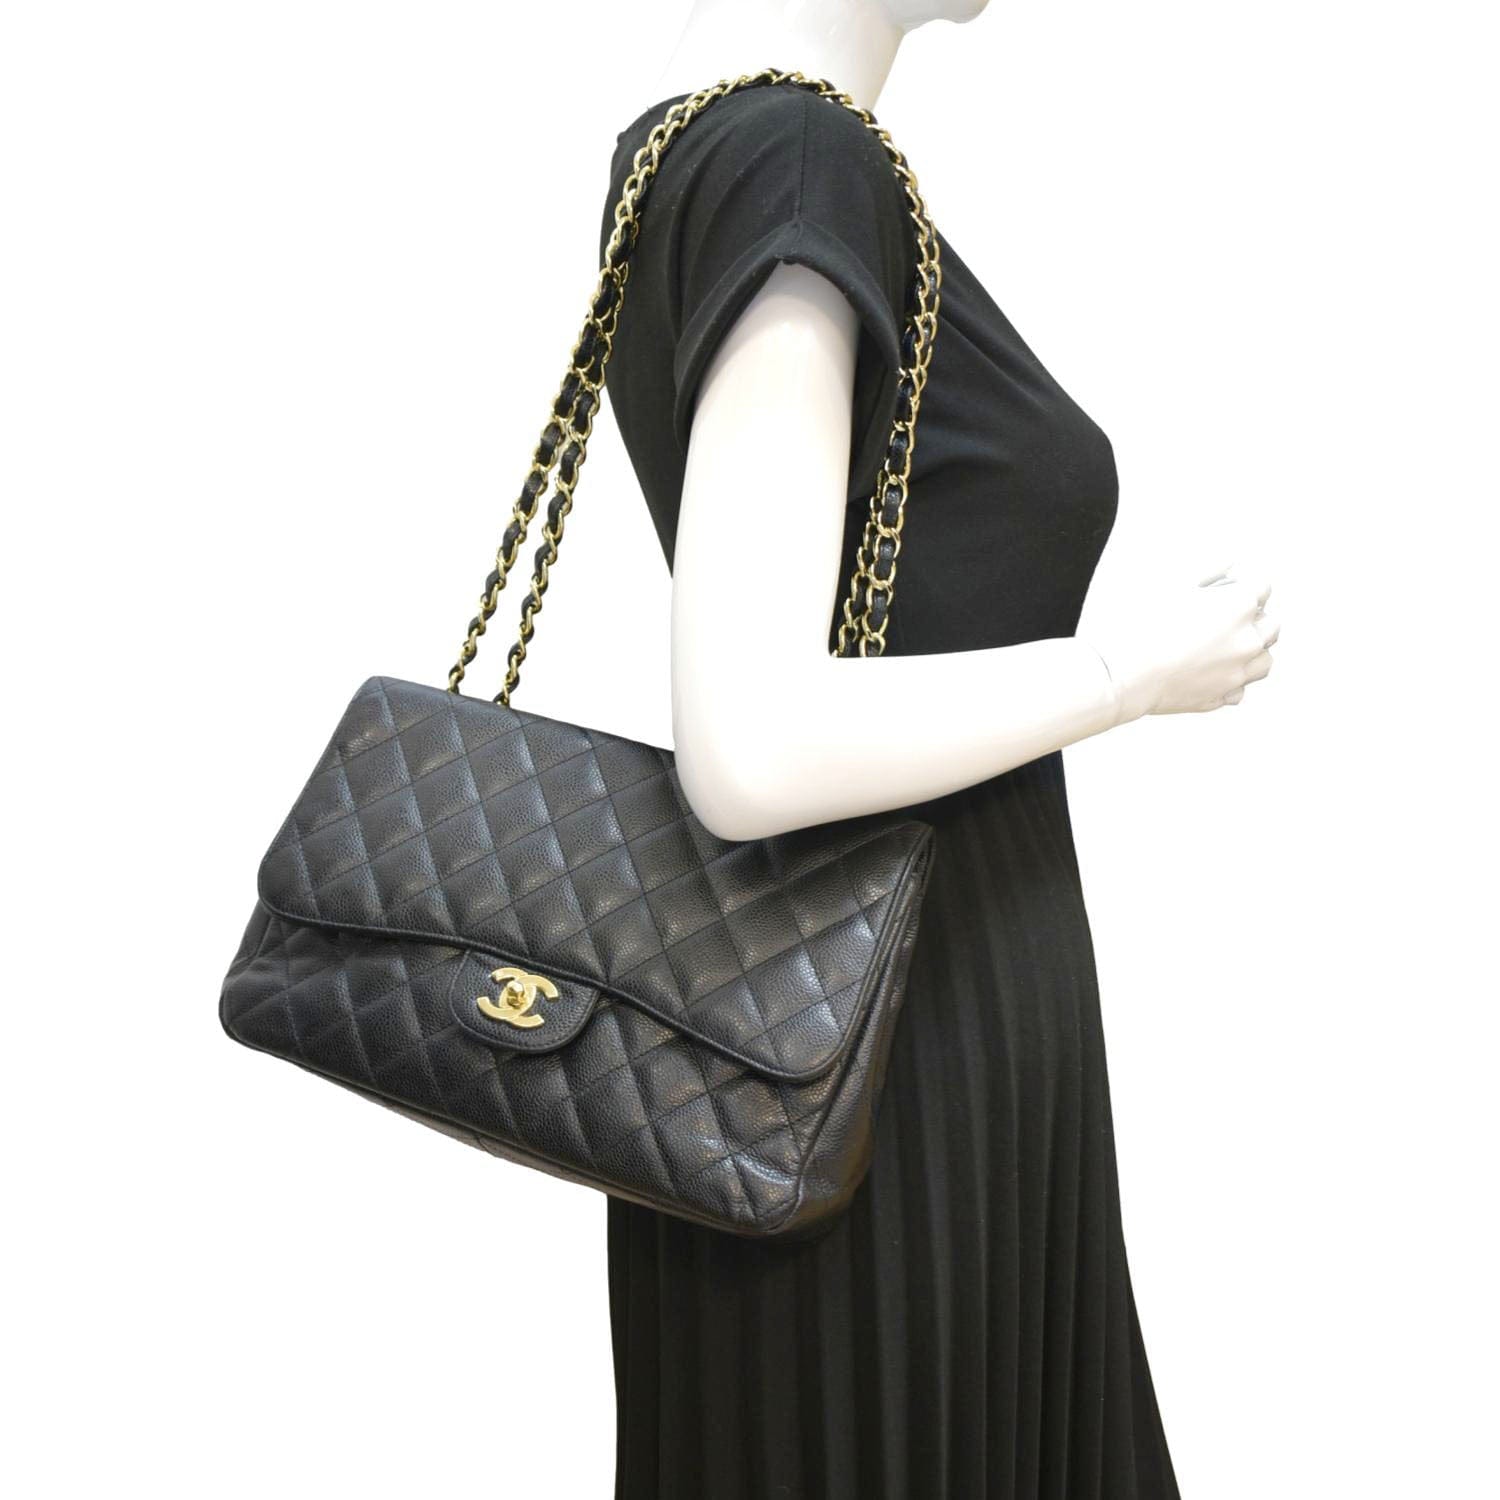 Chanel Black Chevron Quilted Leather Large Single Flap Bag